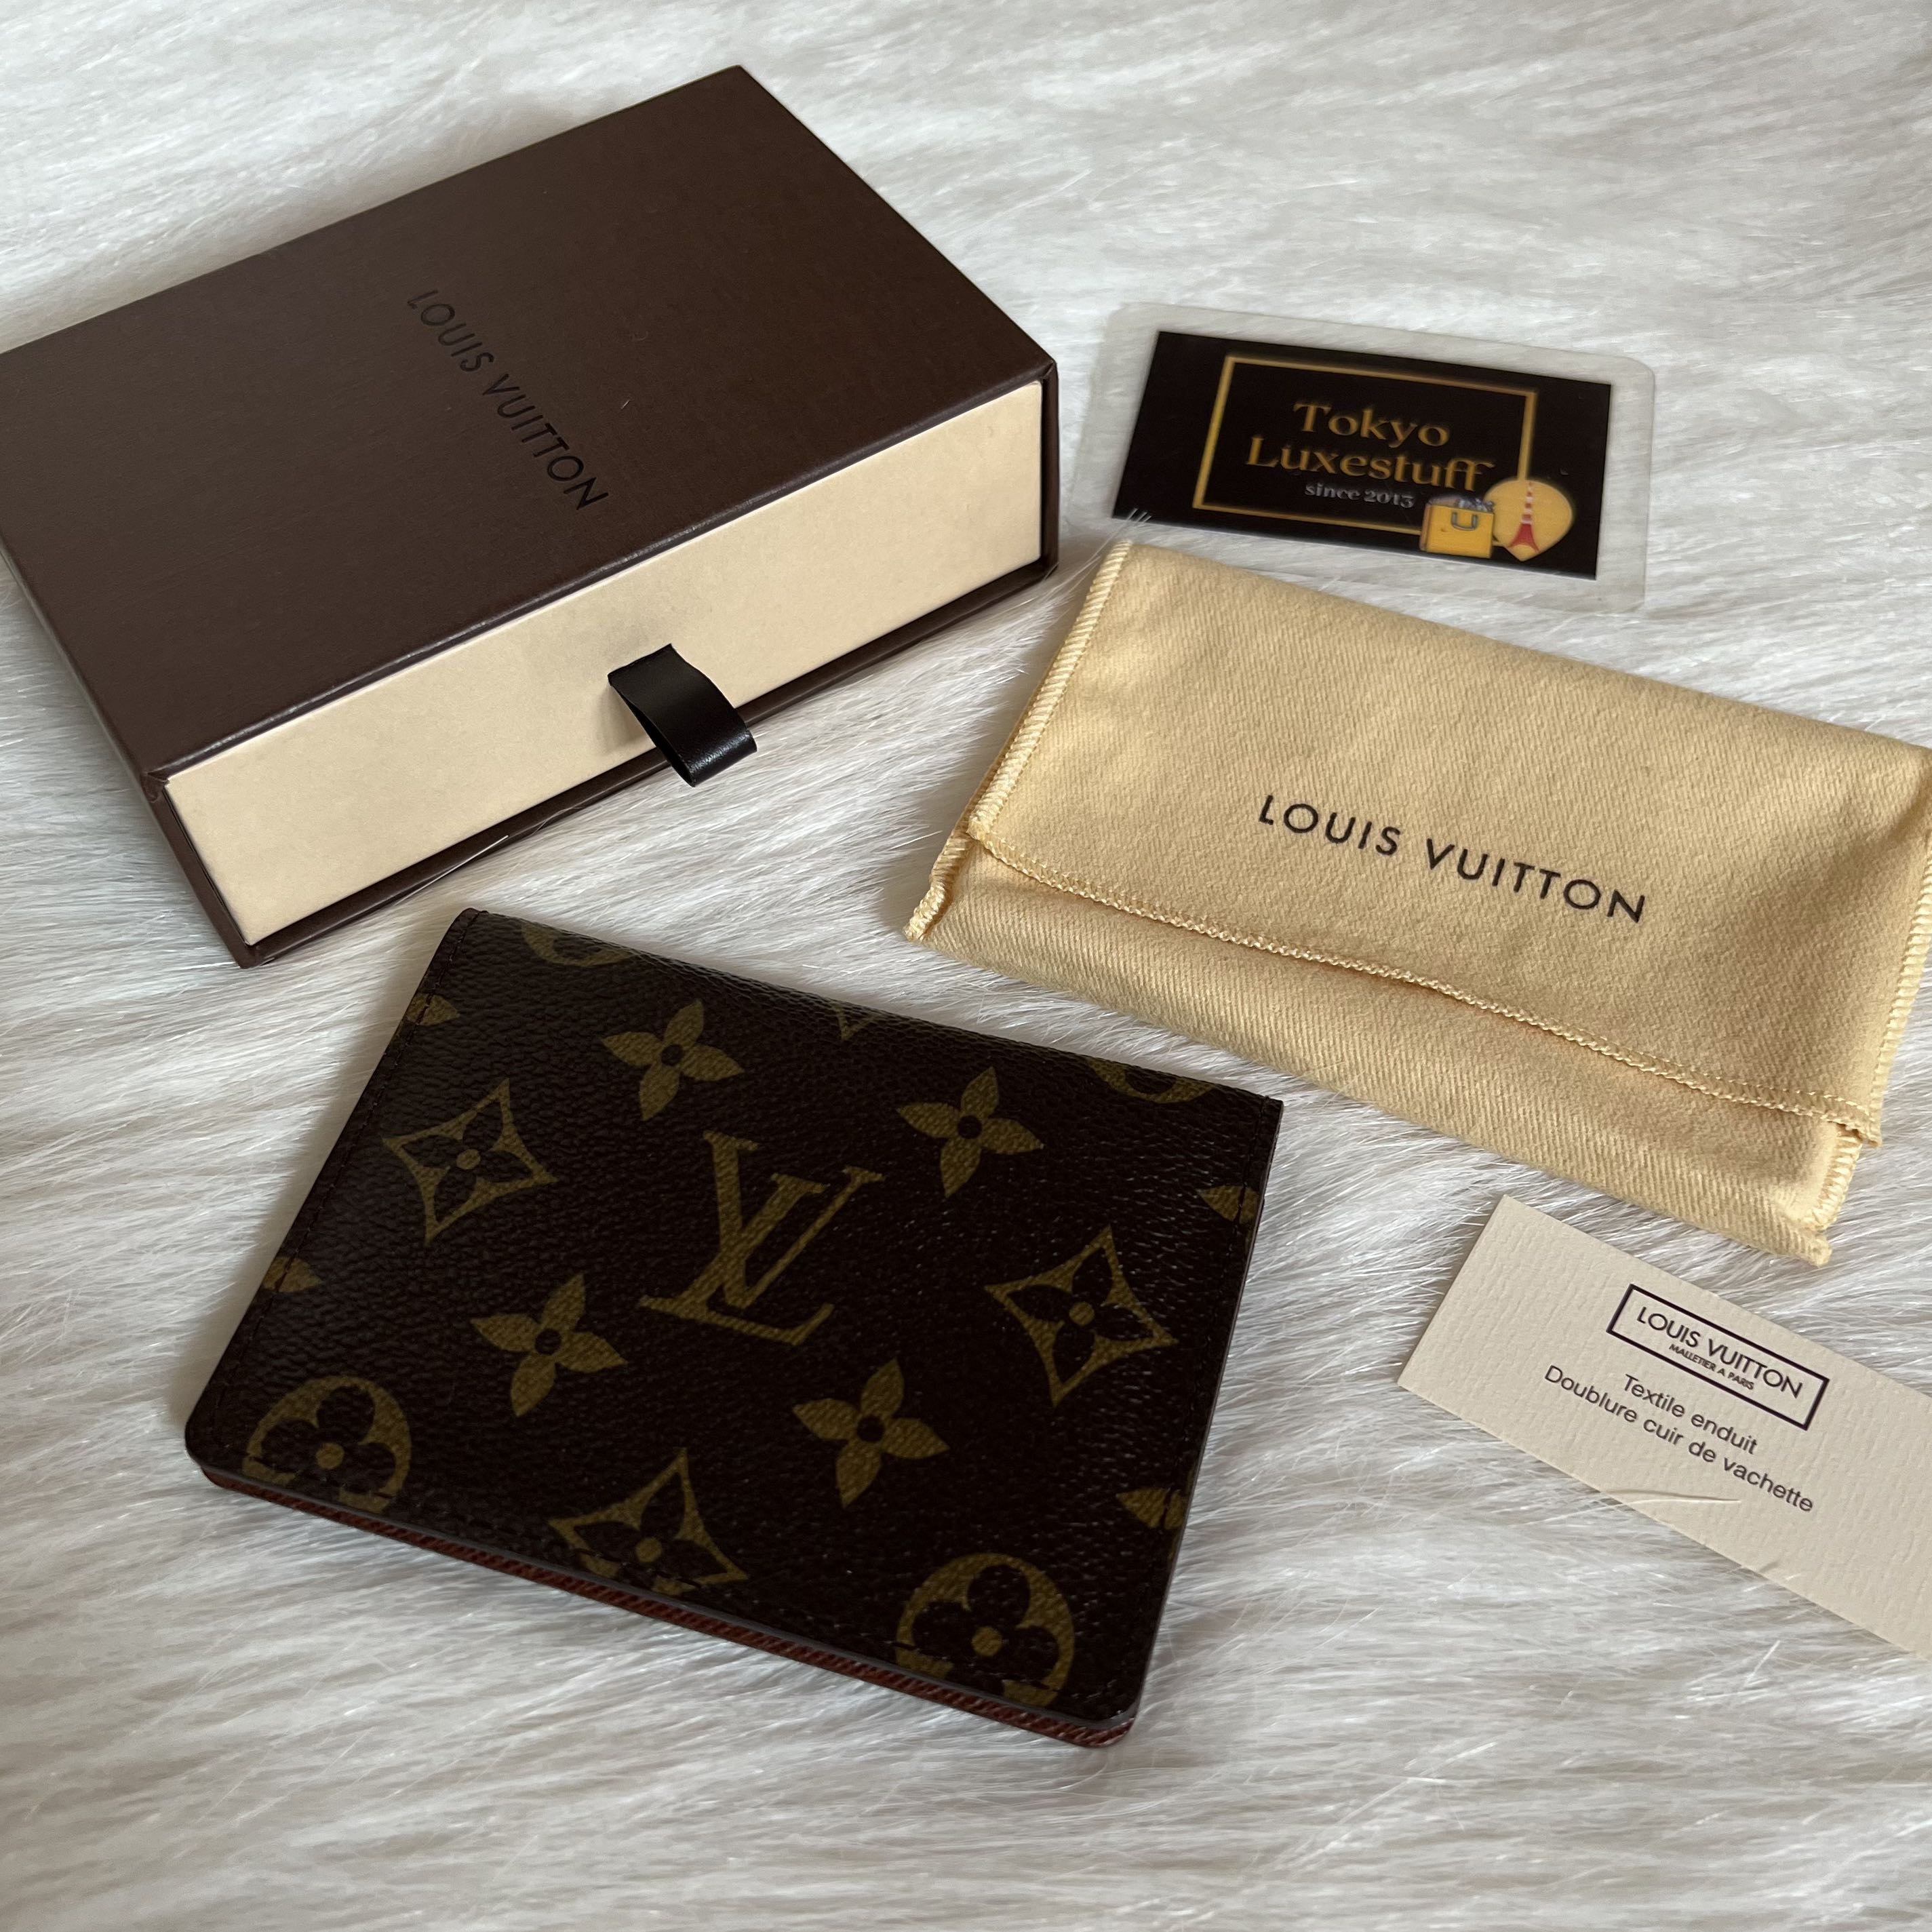 Authentic Preloved Louis Vuitton Monogram Long Billfold Wallet – YOLO  Luxury Consignment